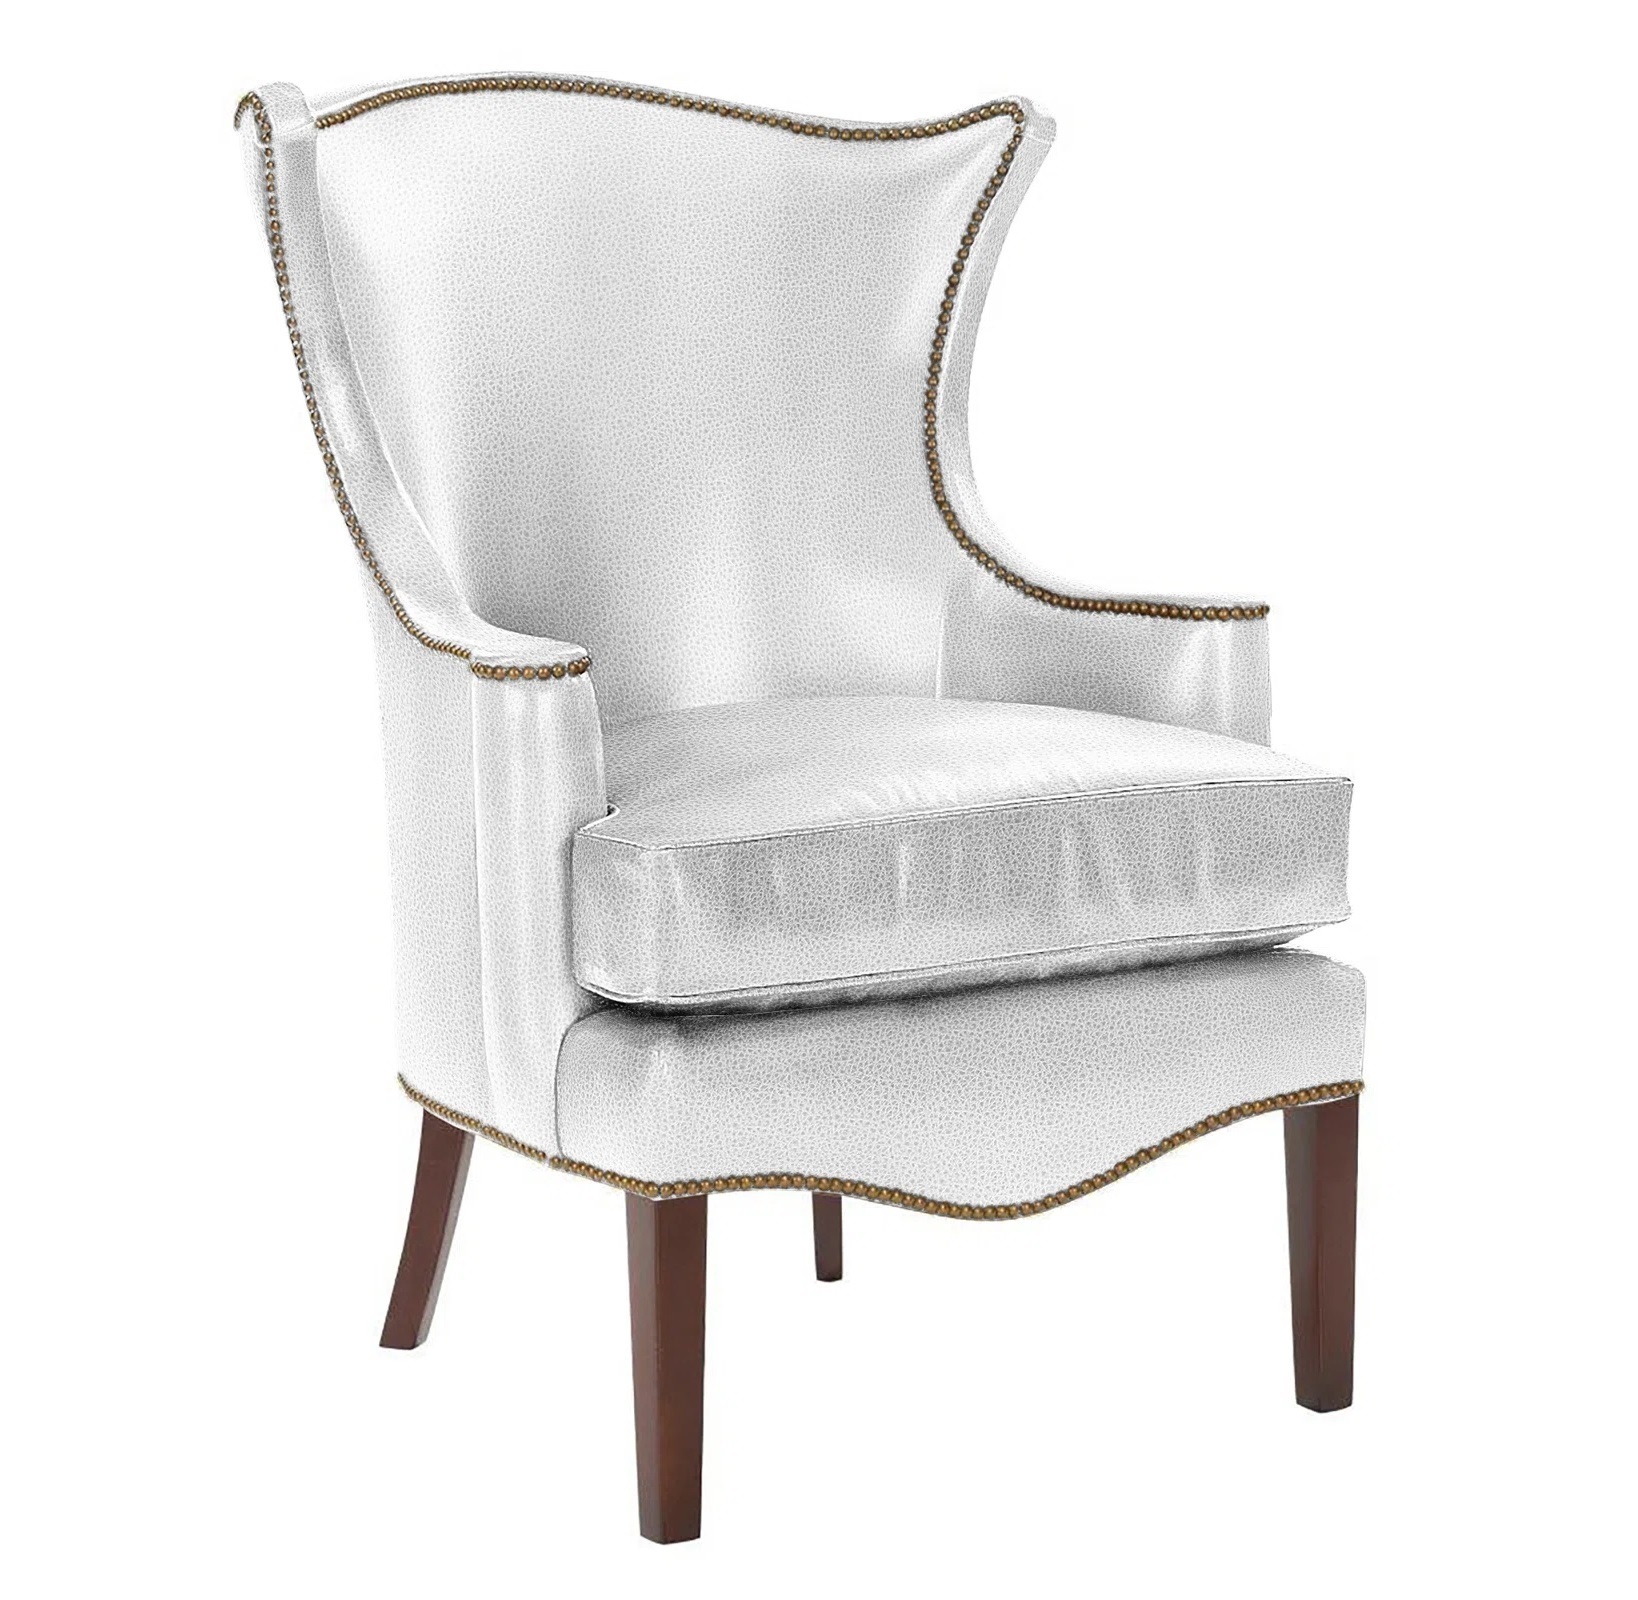 Eye Catching White Wingback Chair